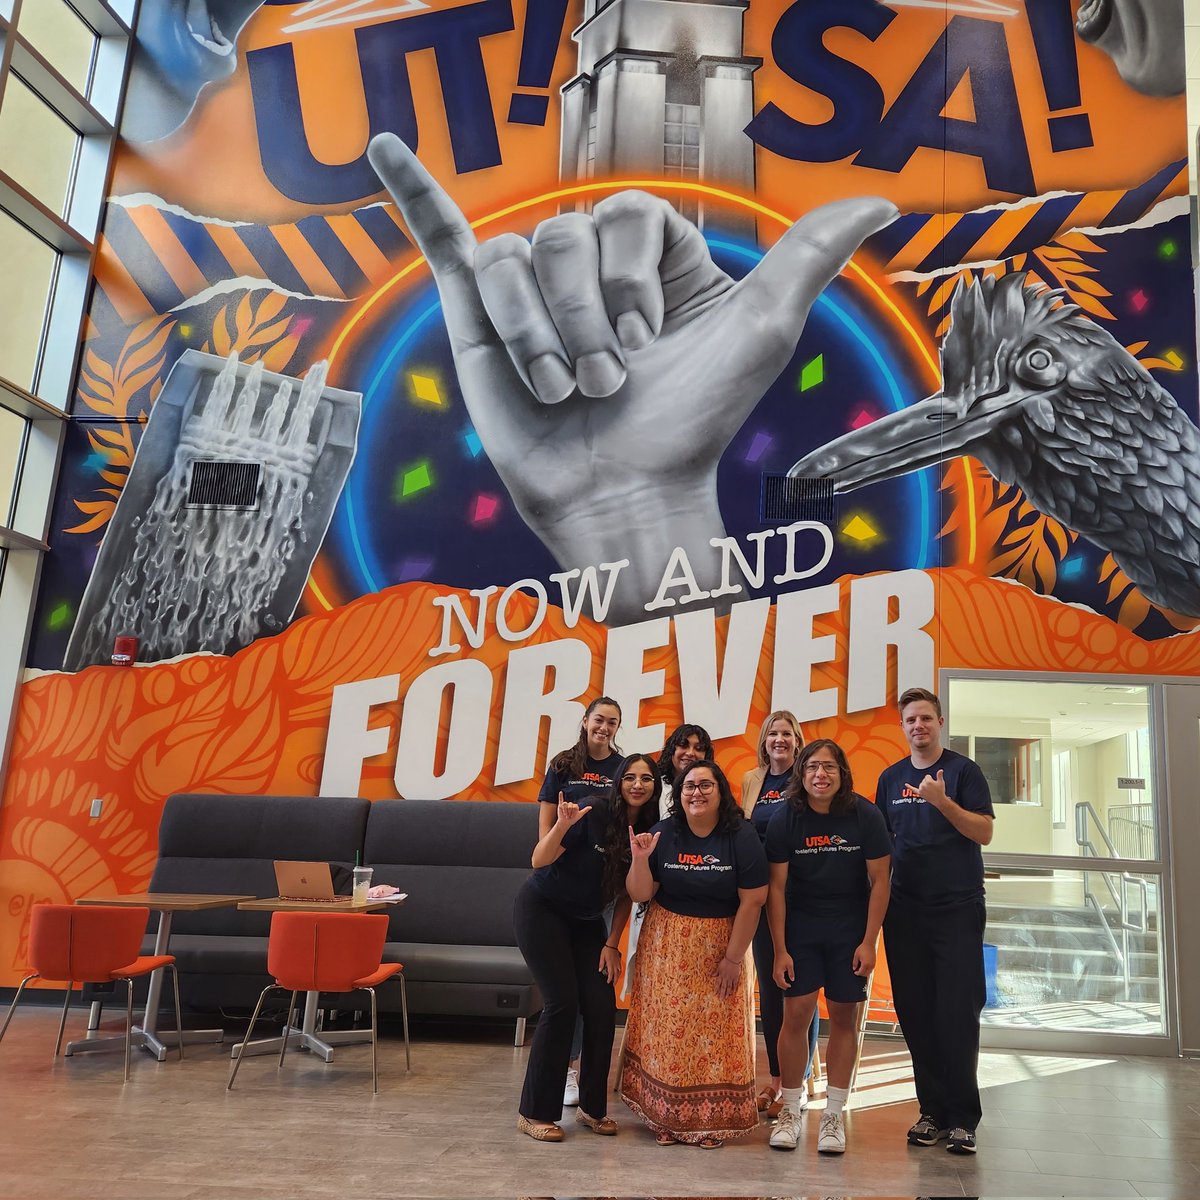 We 🧡💙 LOVE 💙🧡 this mural by @losotrosmurals at #UTSA! 🤙 

🗣 @souplaws We have some big, empty walls in our office that would be perfect for a painting! 😉

#utsaroadrunners #utsafosteringfutures #birdsup #roadrunnernation #nowandforever #sanantoniomurals #sanantonioartist